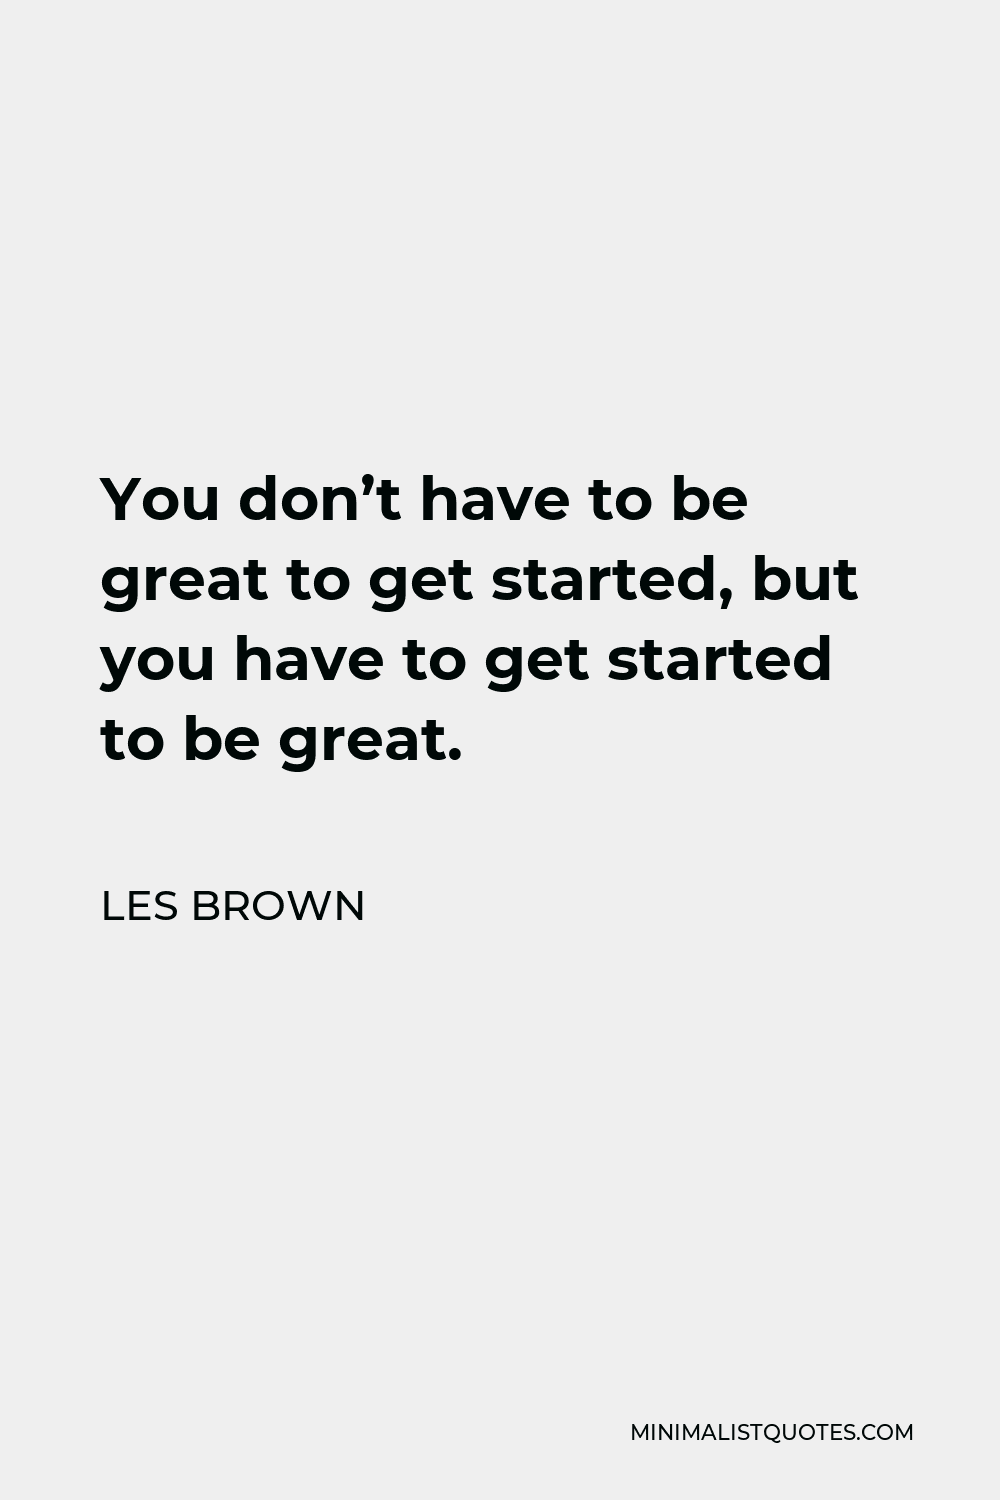 Les Brown Quote - You don’t have to be great to get started, but you have to get started to be great.